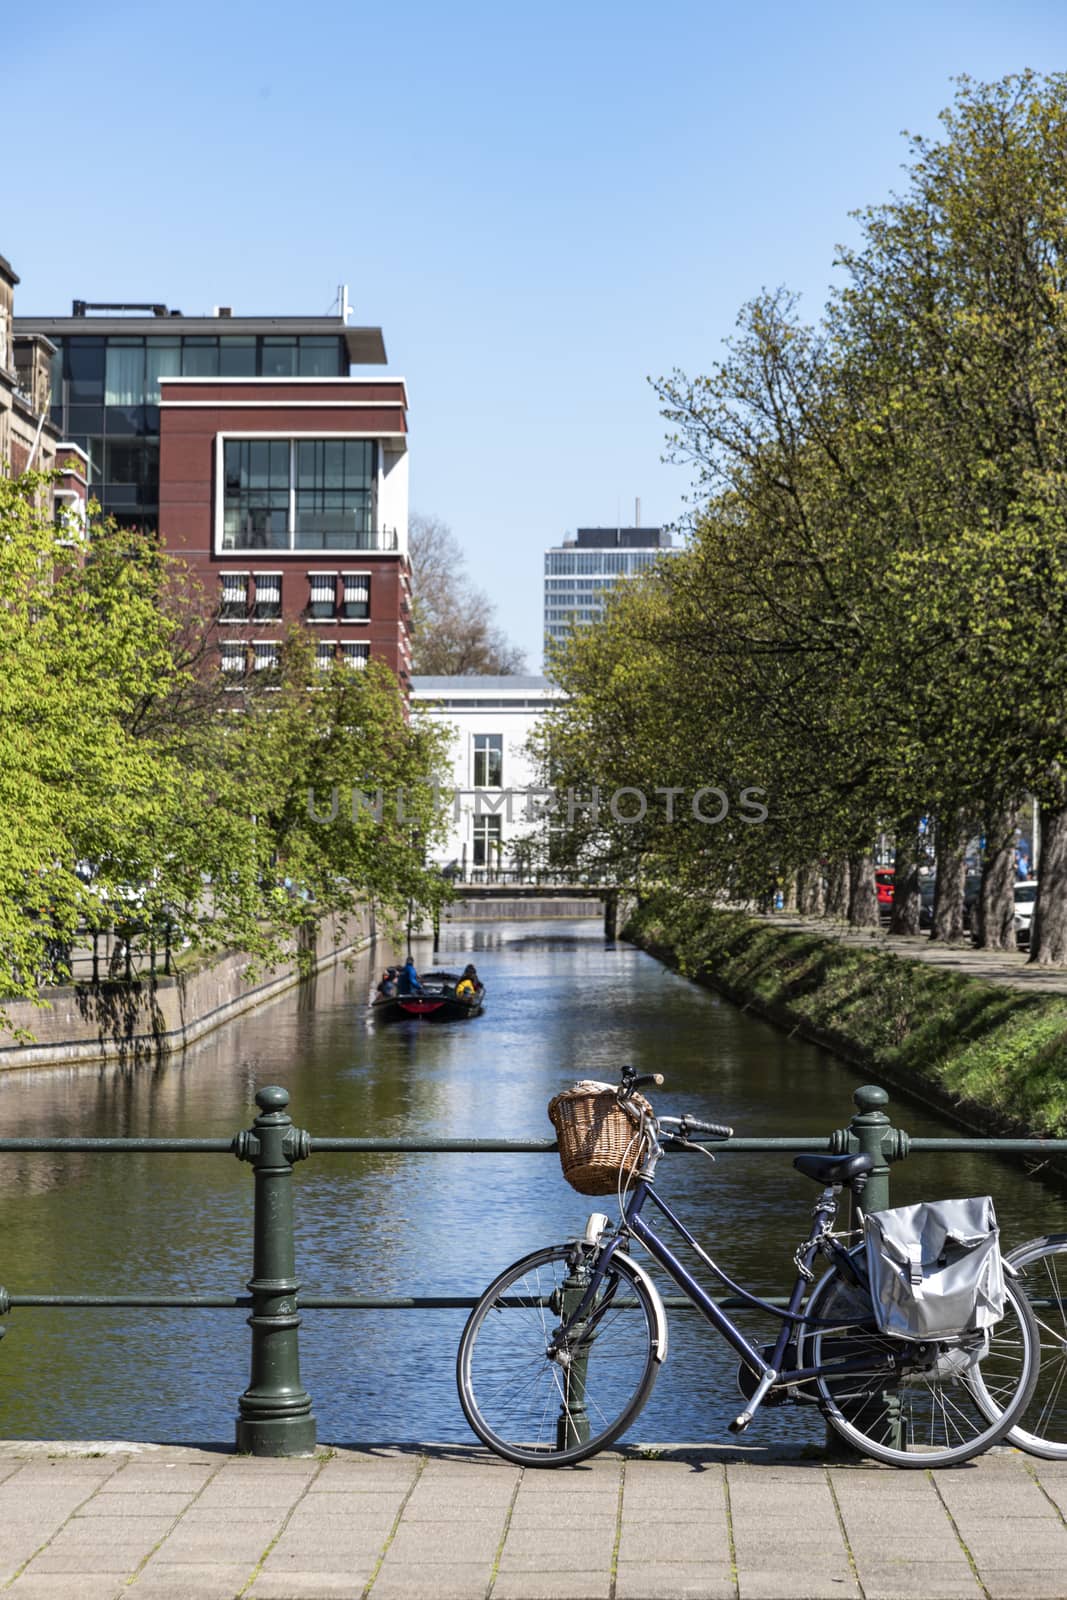 Dutch casual bicycle parking against the fence of a small bridge and road over calm canal through The Hague city under a cloudless sky, Netherlands by ankorlight